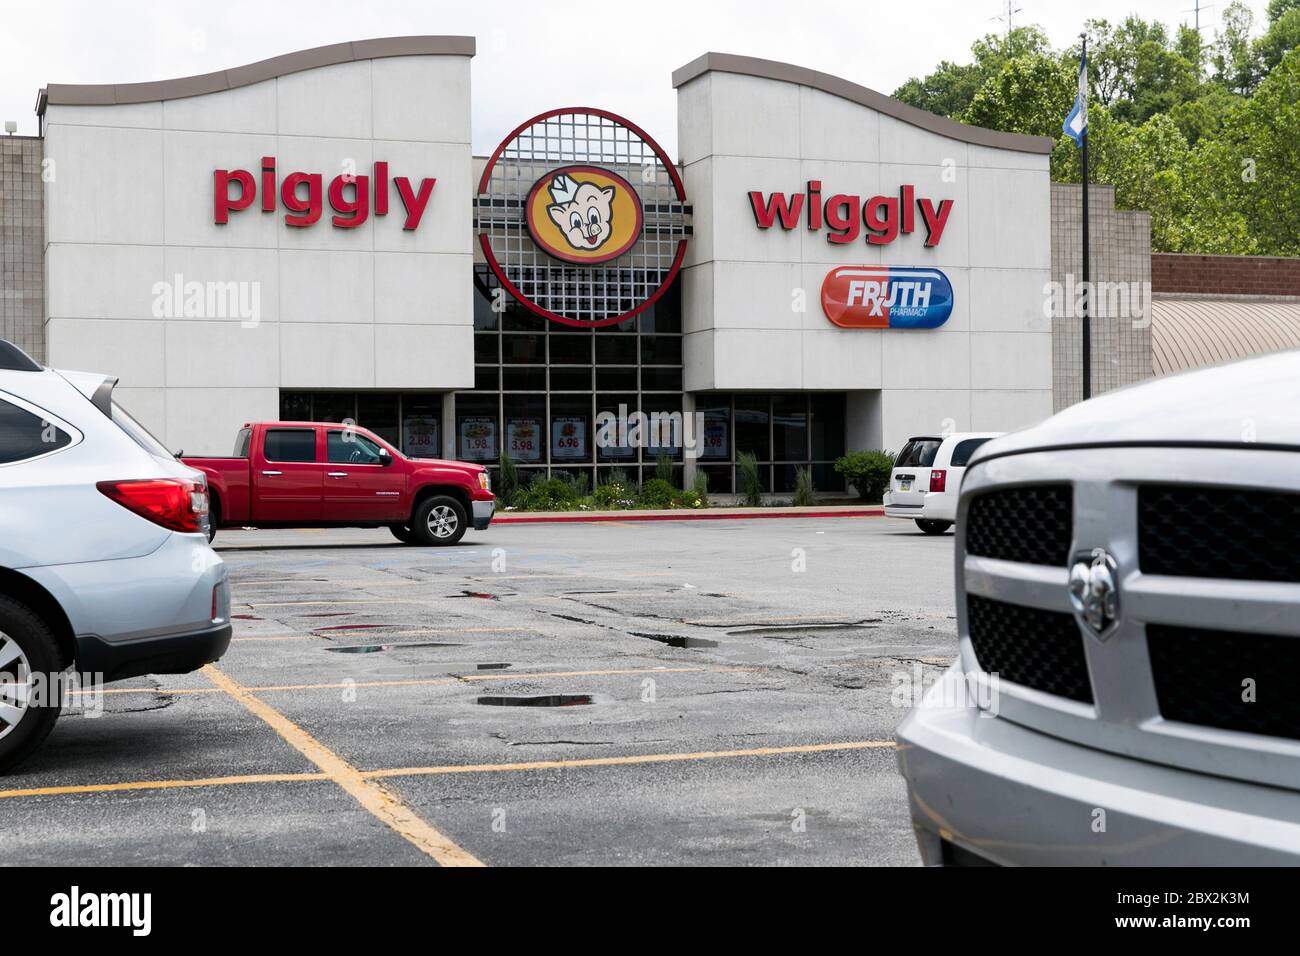 A logo sign outside of a Piggly Wiggly retail grocery store location in Charleston, West Virginia on May 29, 2020. Stock Photo